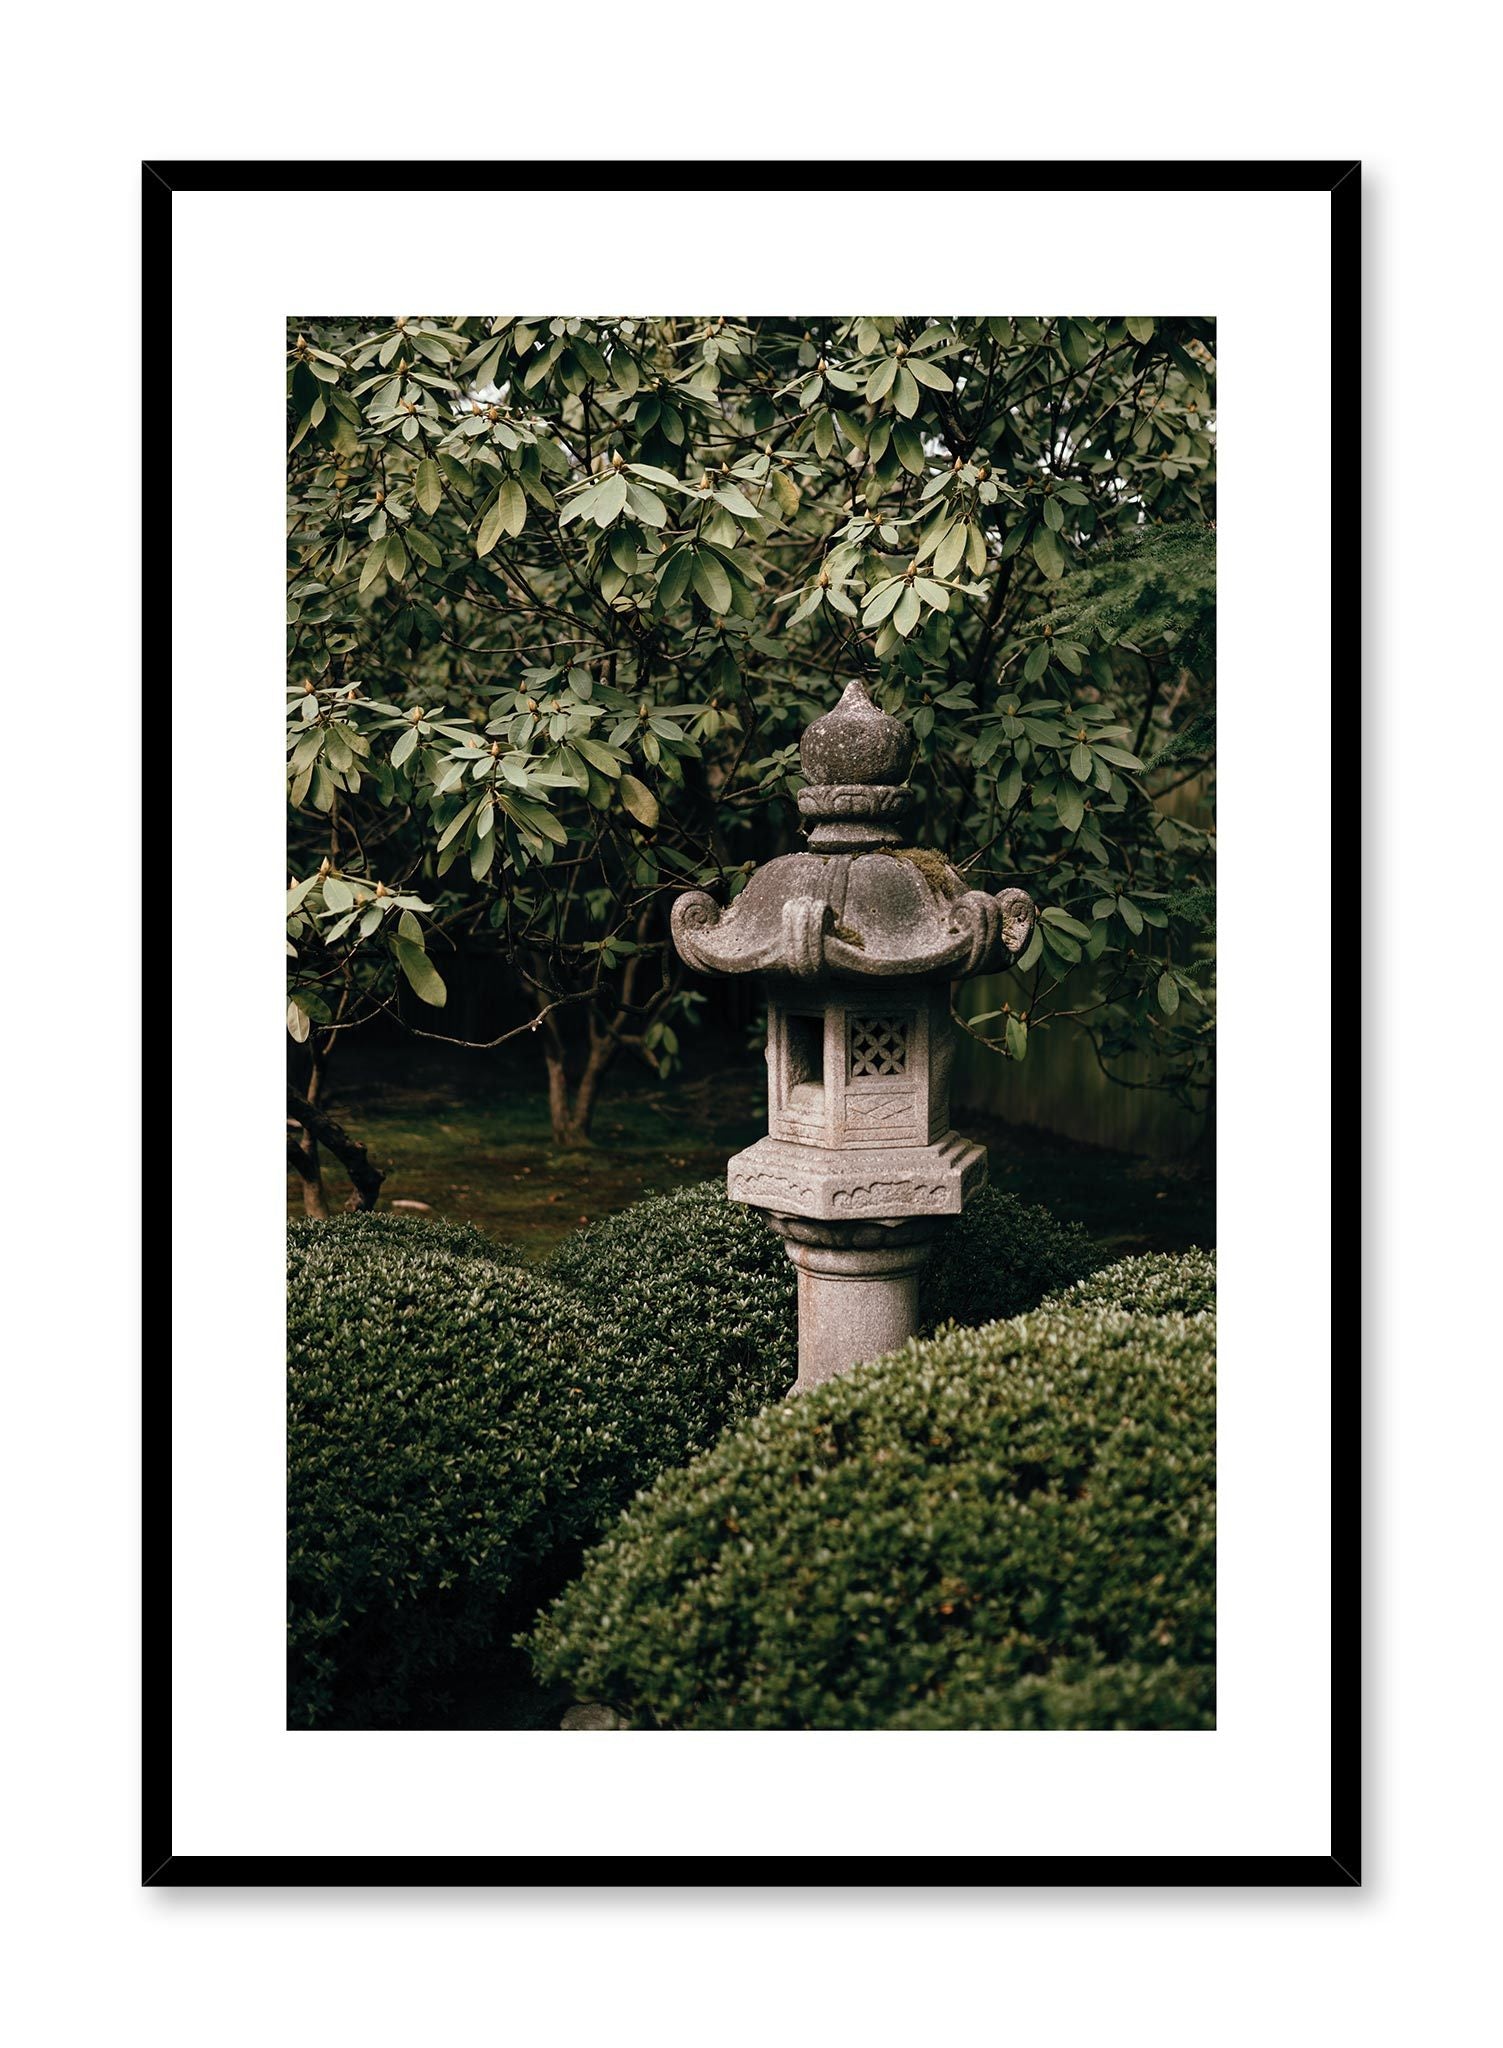 Temple is a minimalist photography by Opposite Wall of a Japanese lantern commonly found in temples.